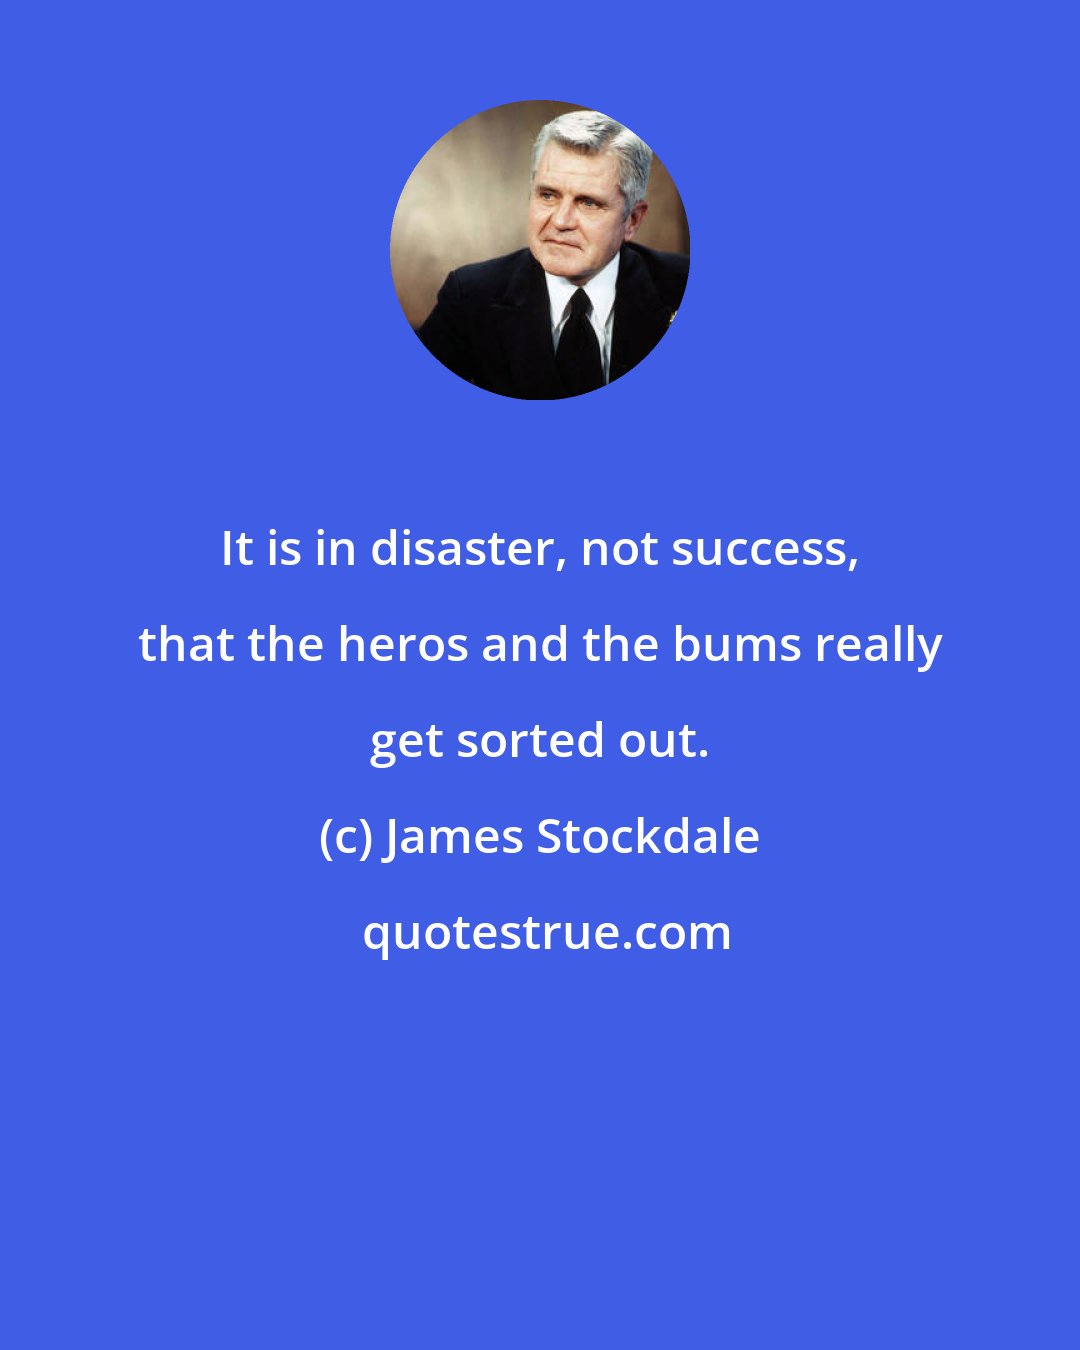 James Stockdale: It is in disaster, not success, that the heros and the bums really get sorted out.